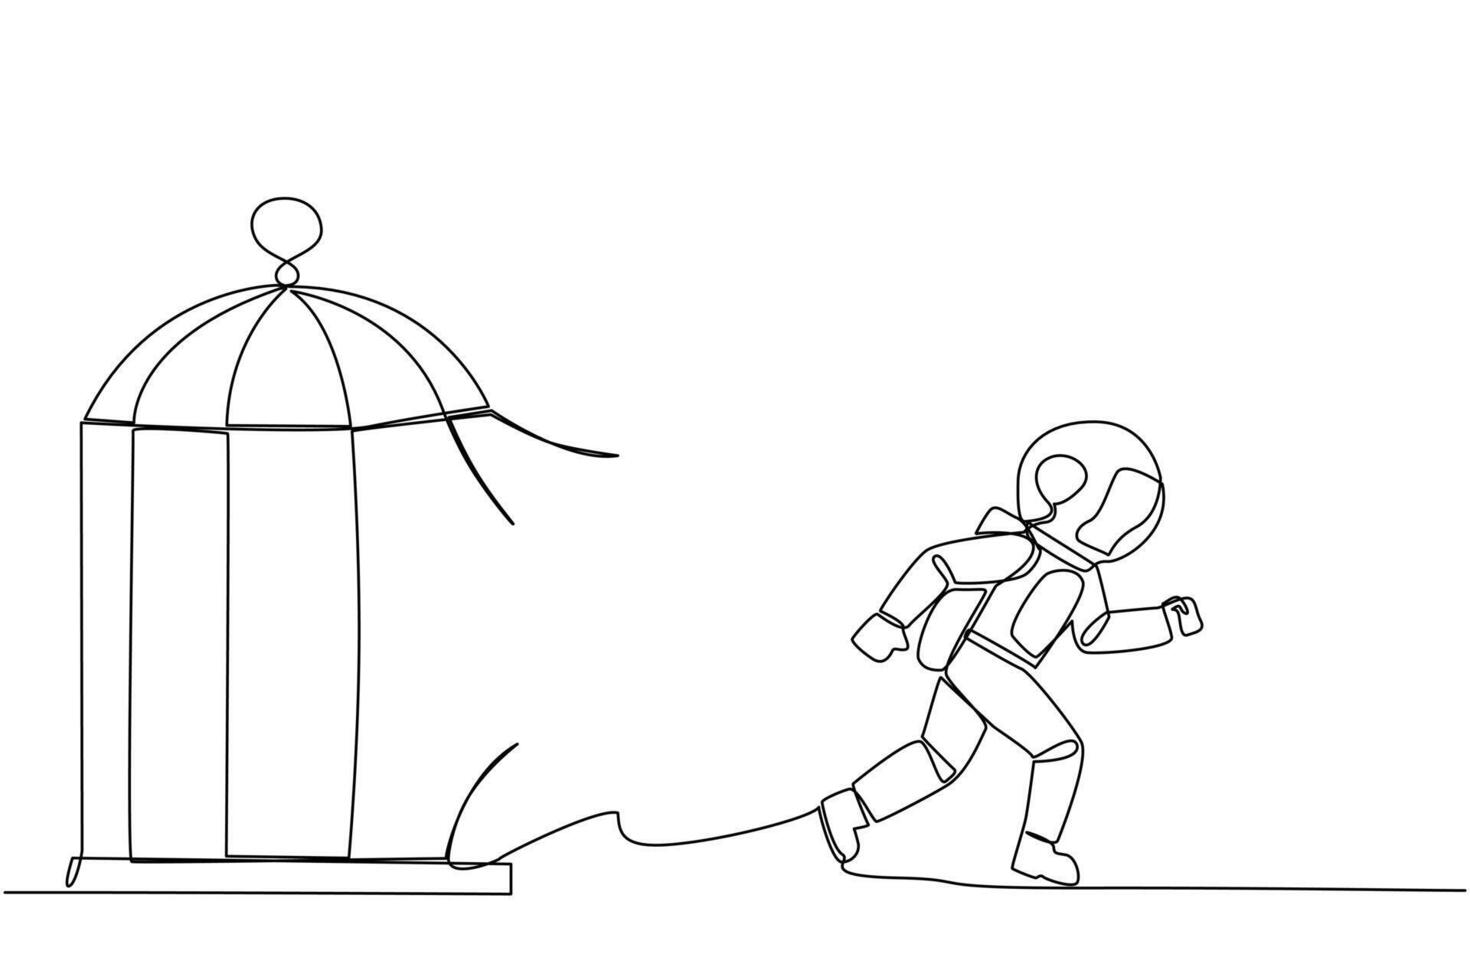 Single one line drawing young astronaut trapped in the cage running through the cage. Metaphor penetrates the maximum limit of self. Desire to succeed. Continuous line design graphic illustration vector